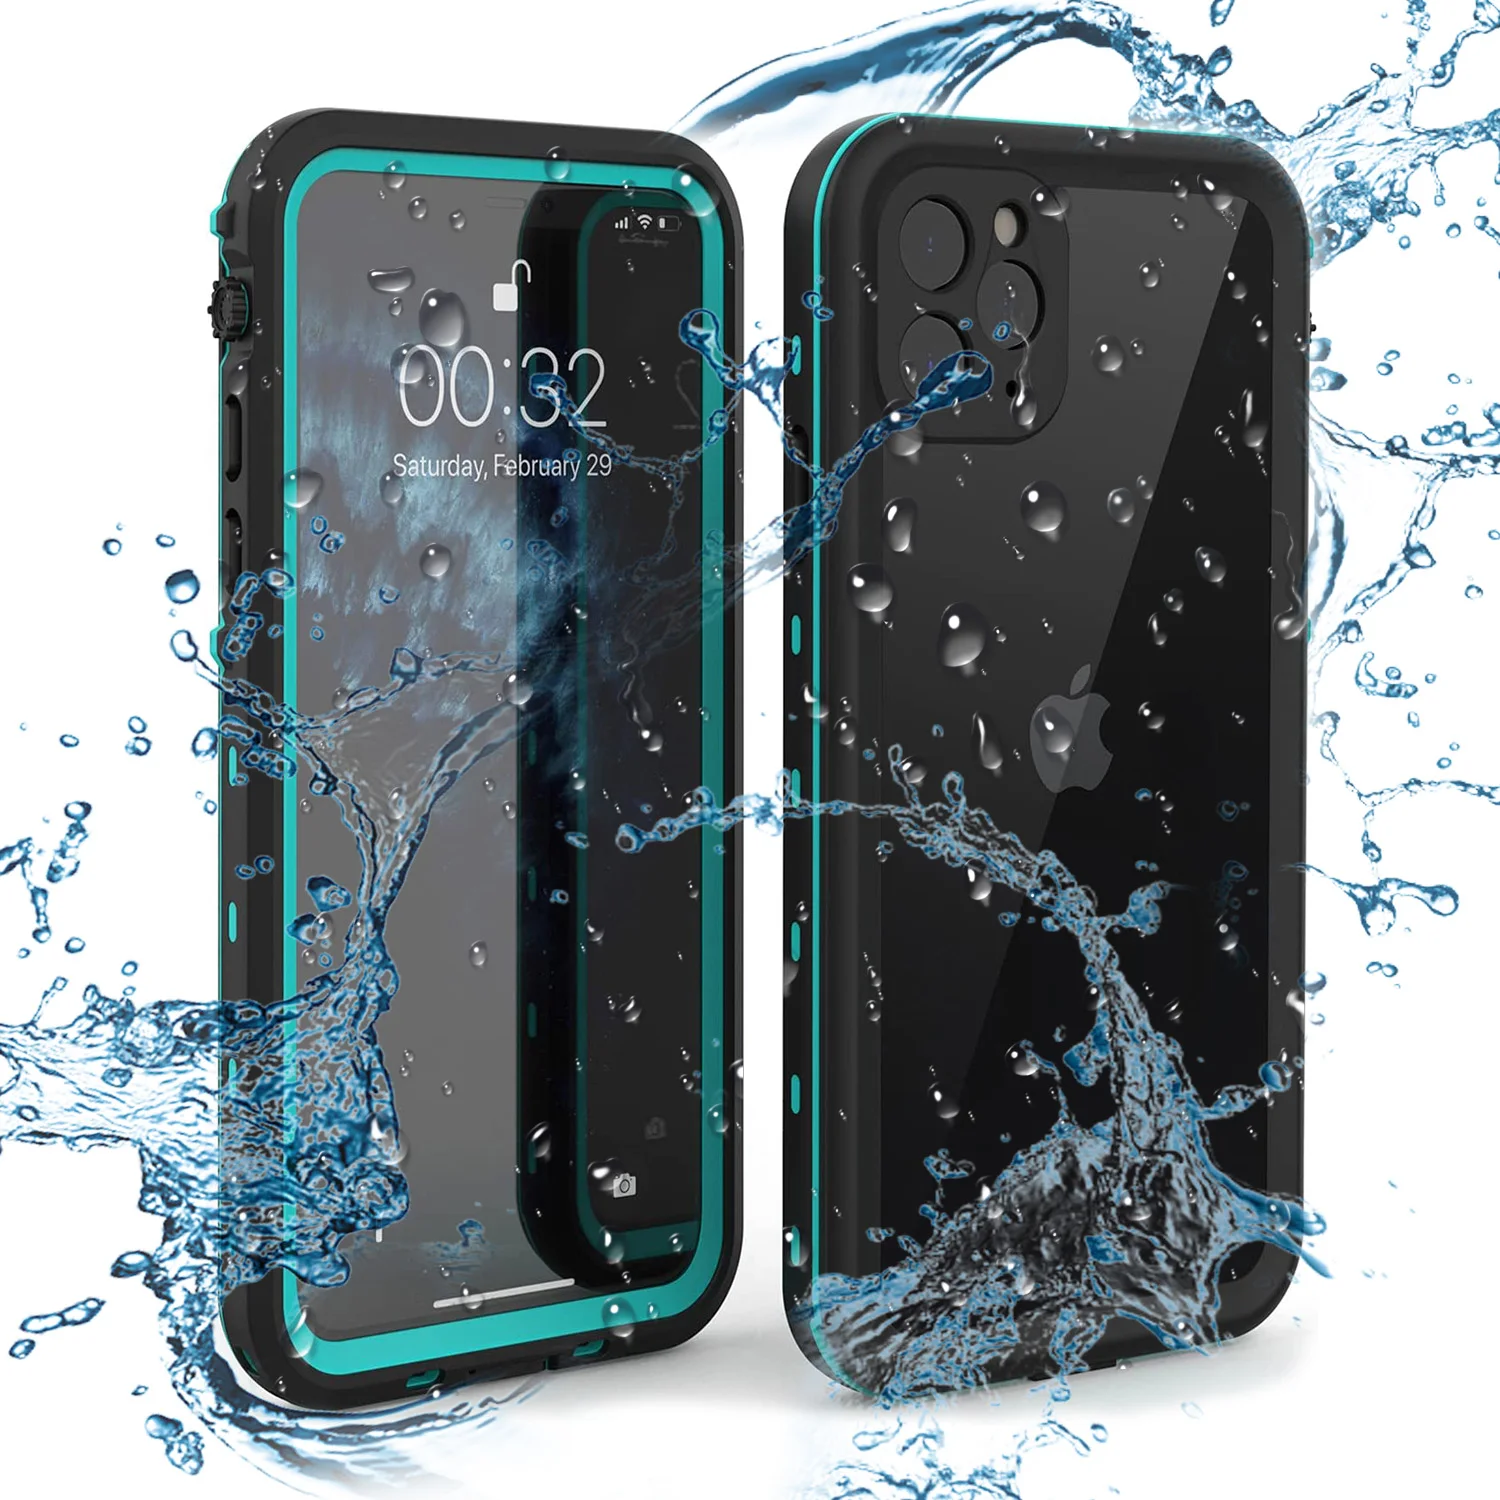 

Waterproof Phone Case for iphone11 pro max Shockproof, Dustproof Full Body Protection Cover TPU Rugged Bumper Underwater Case